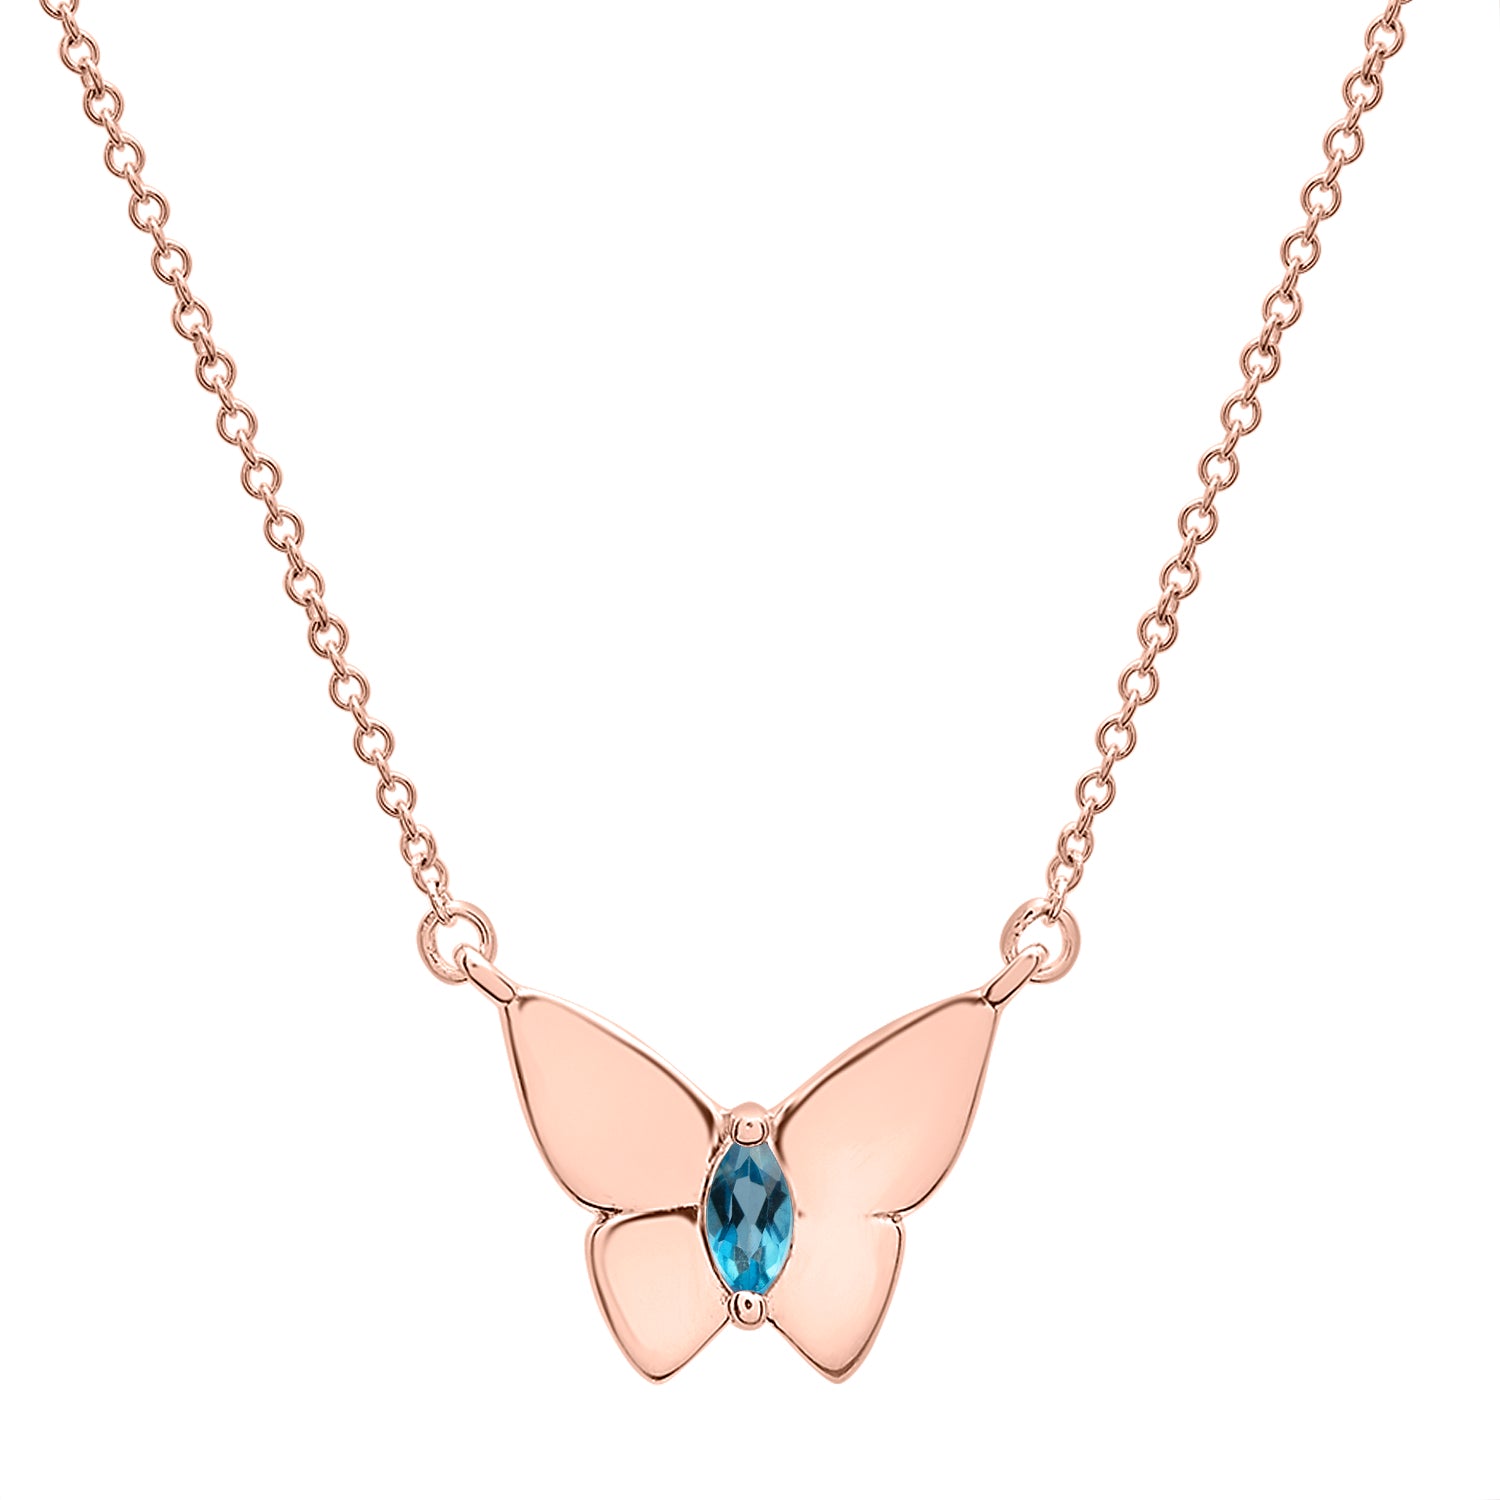 Butterfly Birthstone Necklace in Sky Blue with Gold chain